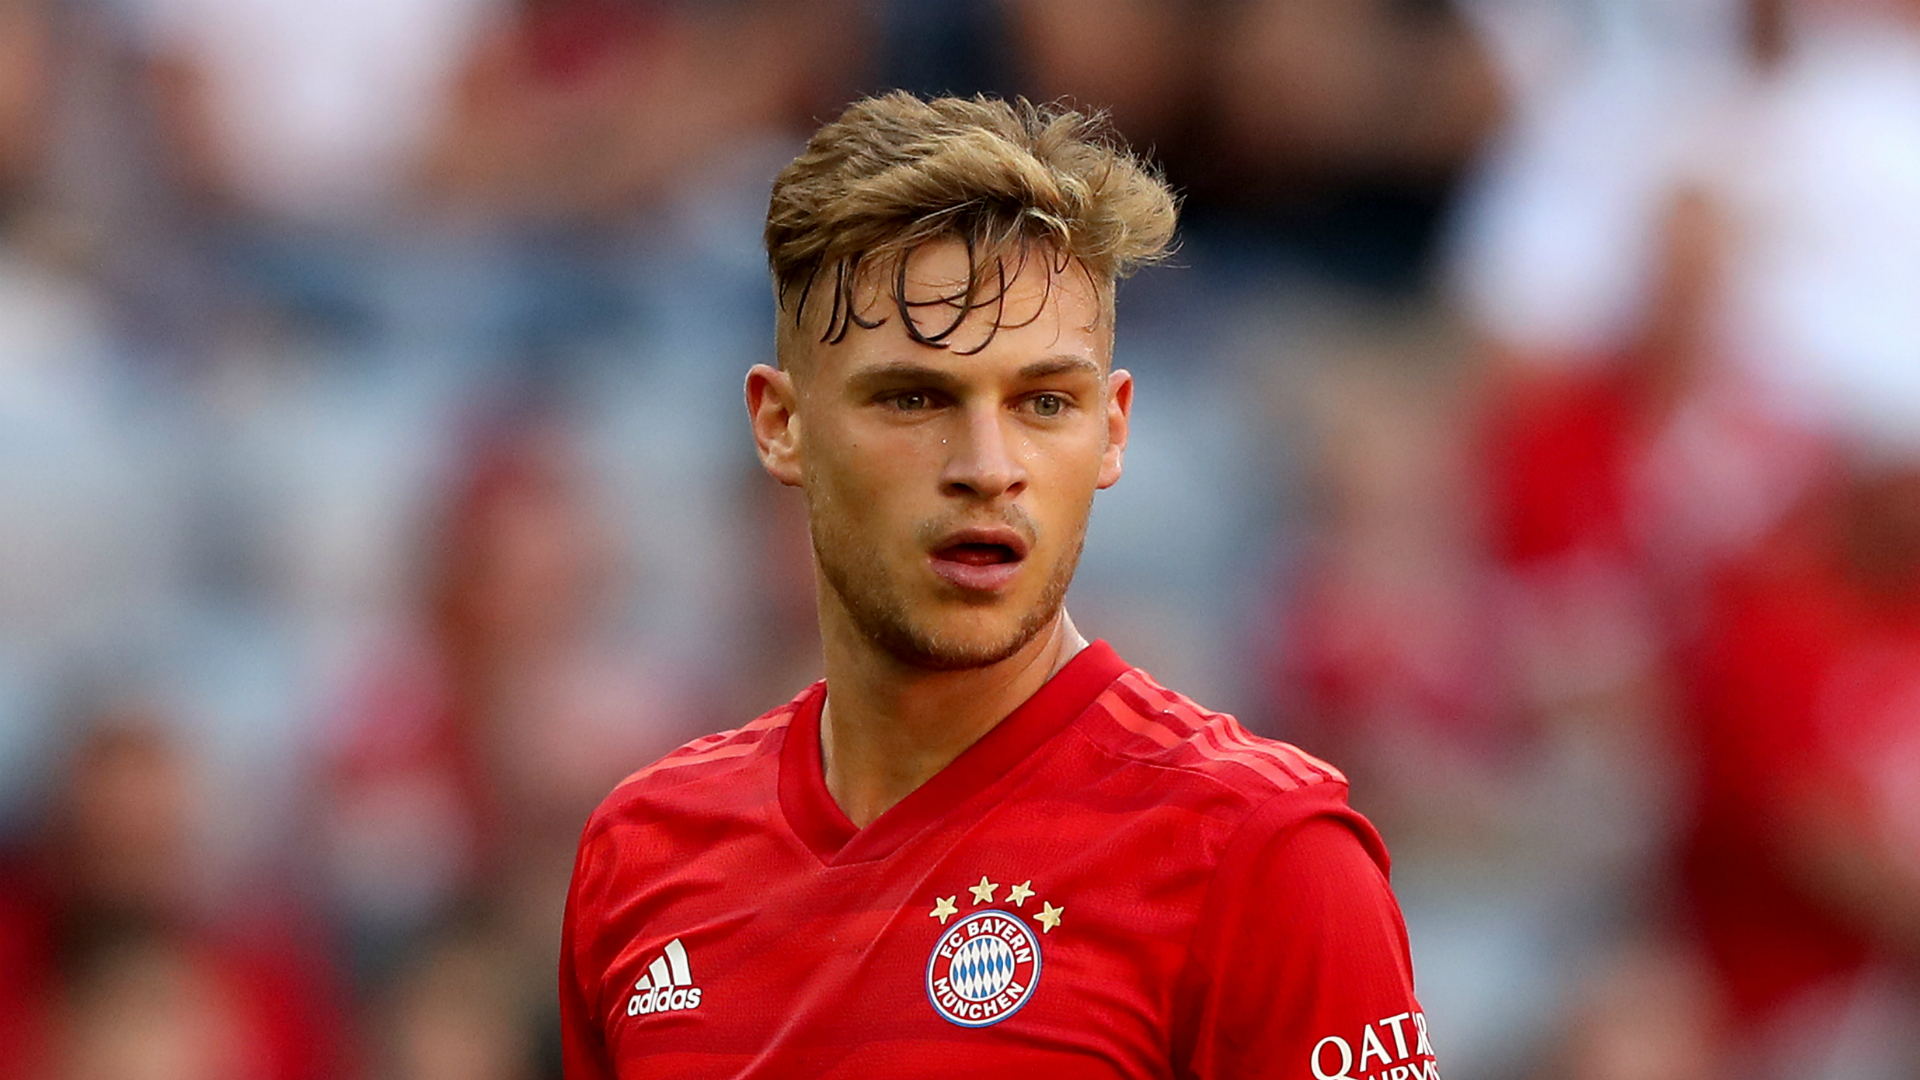  Joshua Kimmich is playing soccer for Bayern Munich in the Bundesliga.